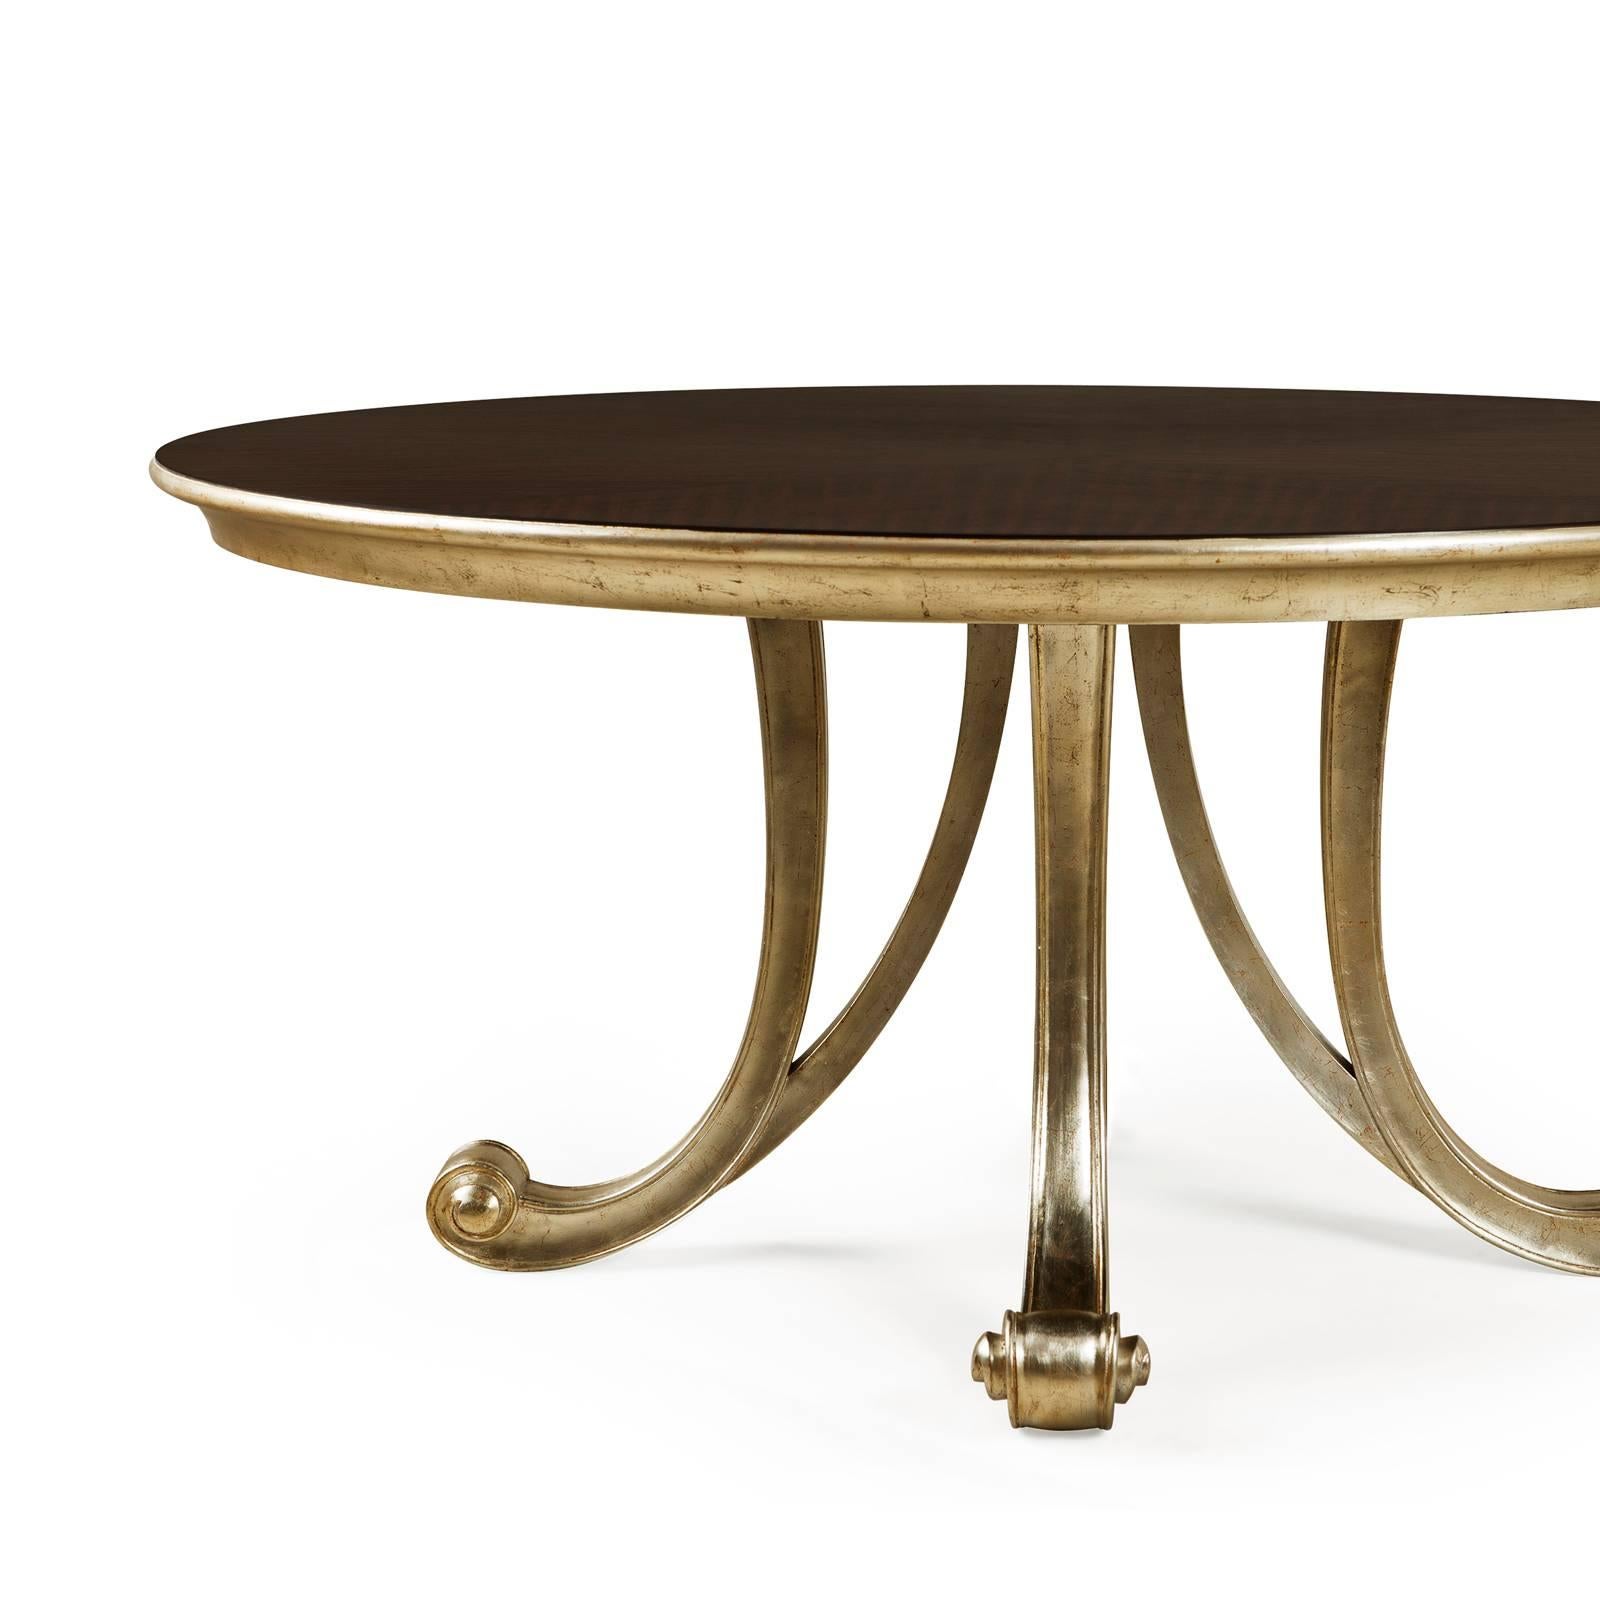 Round table Orcade with hand-crafted solid mahogany wood 
structure. Base and top's frame hand-painted with high quality
gold paint. With a hand-varnished top.
 